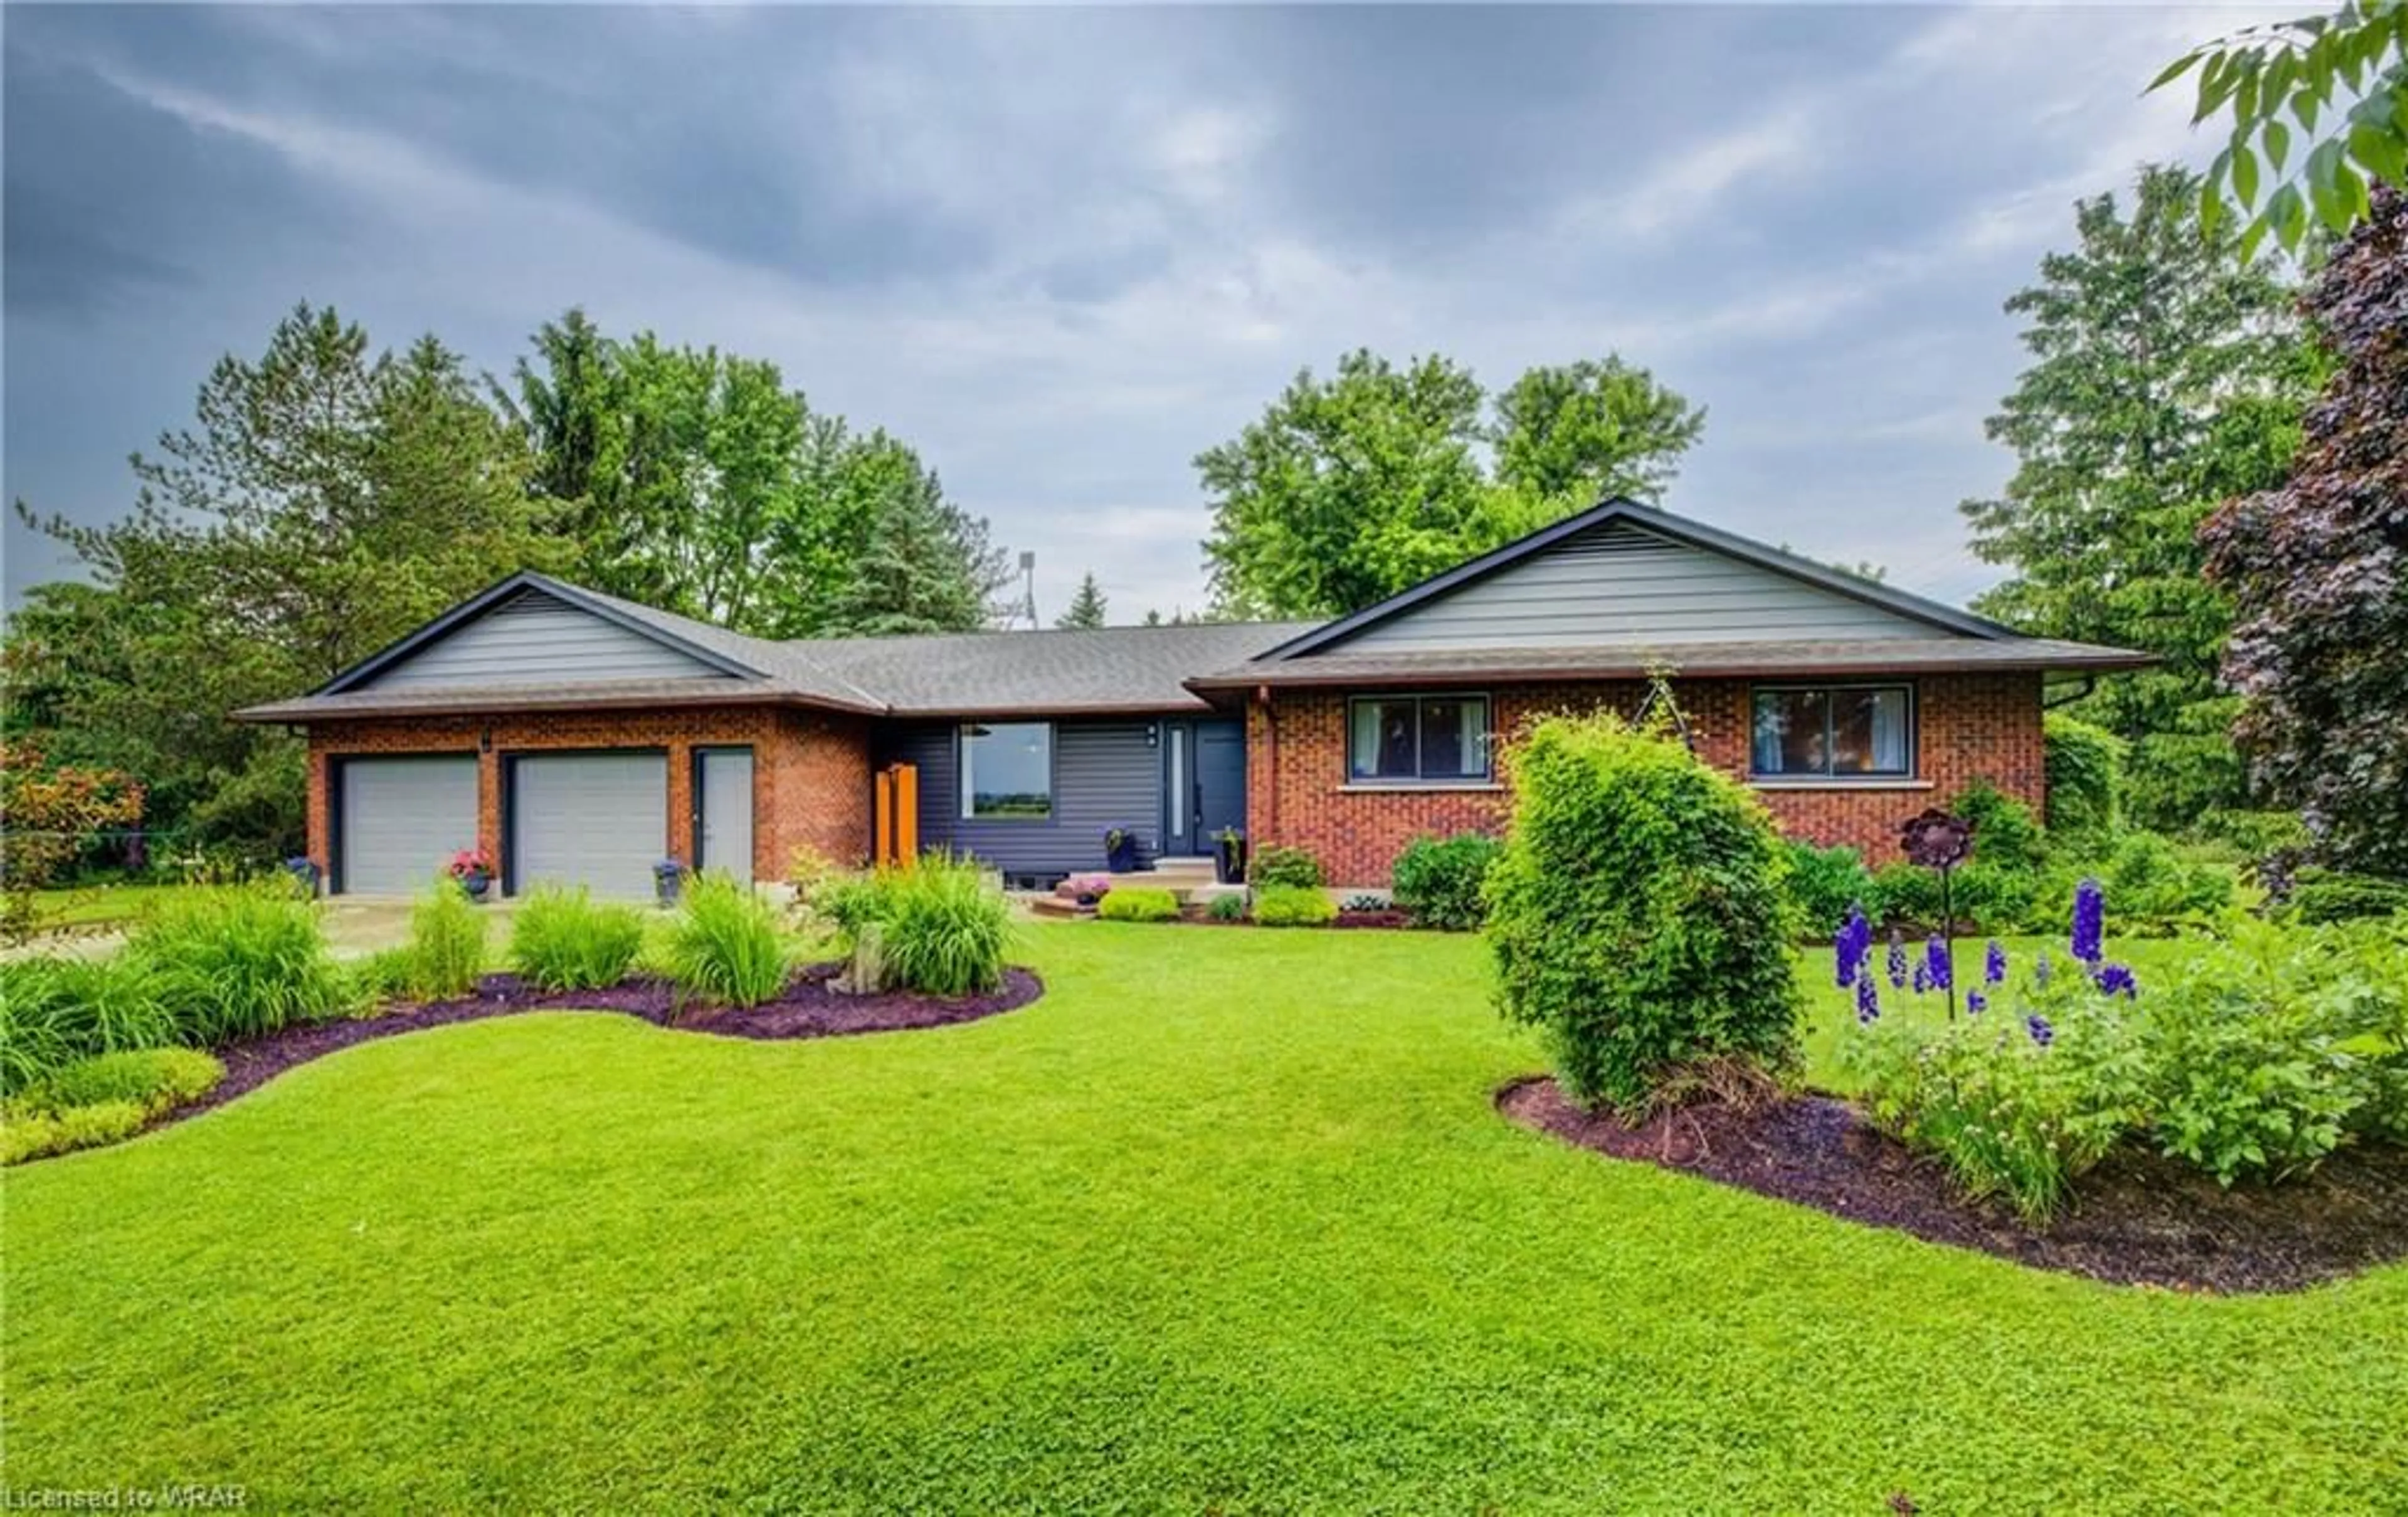 Home with brick exterior material for 858 Nafziger Rd, New Hamburg Ontario N3A 3G6